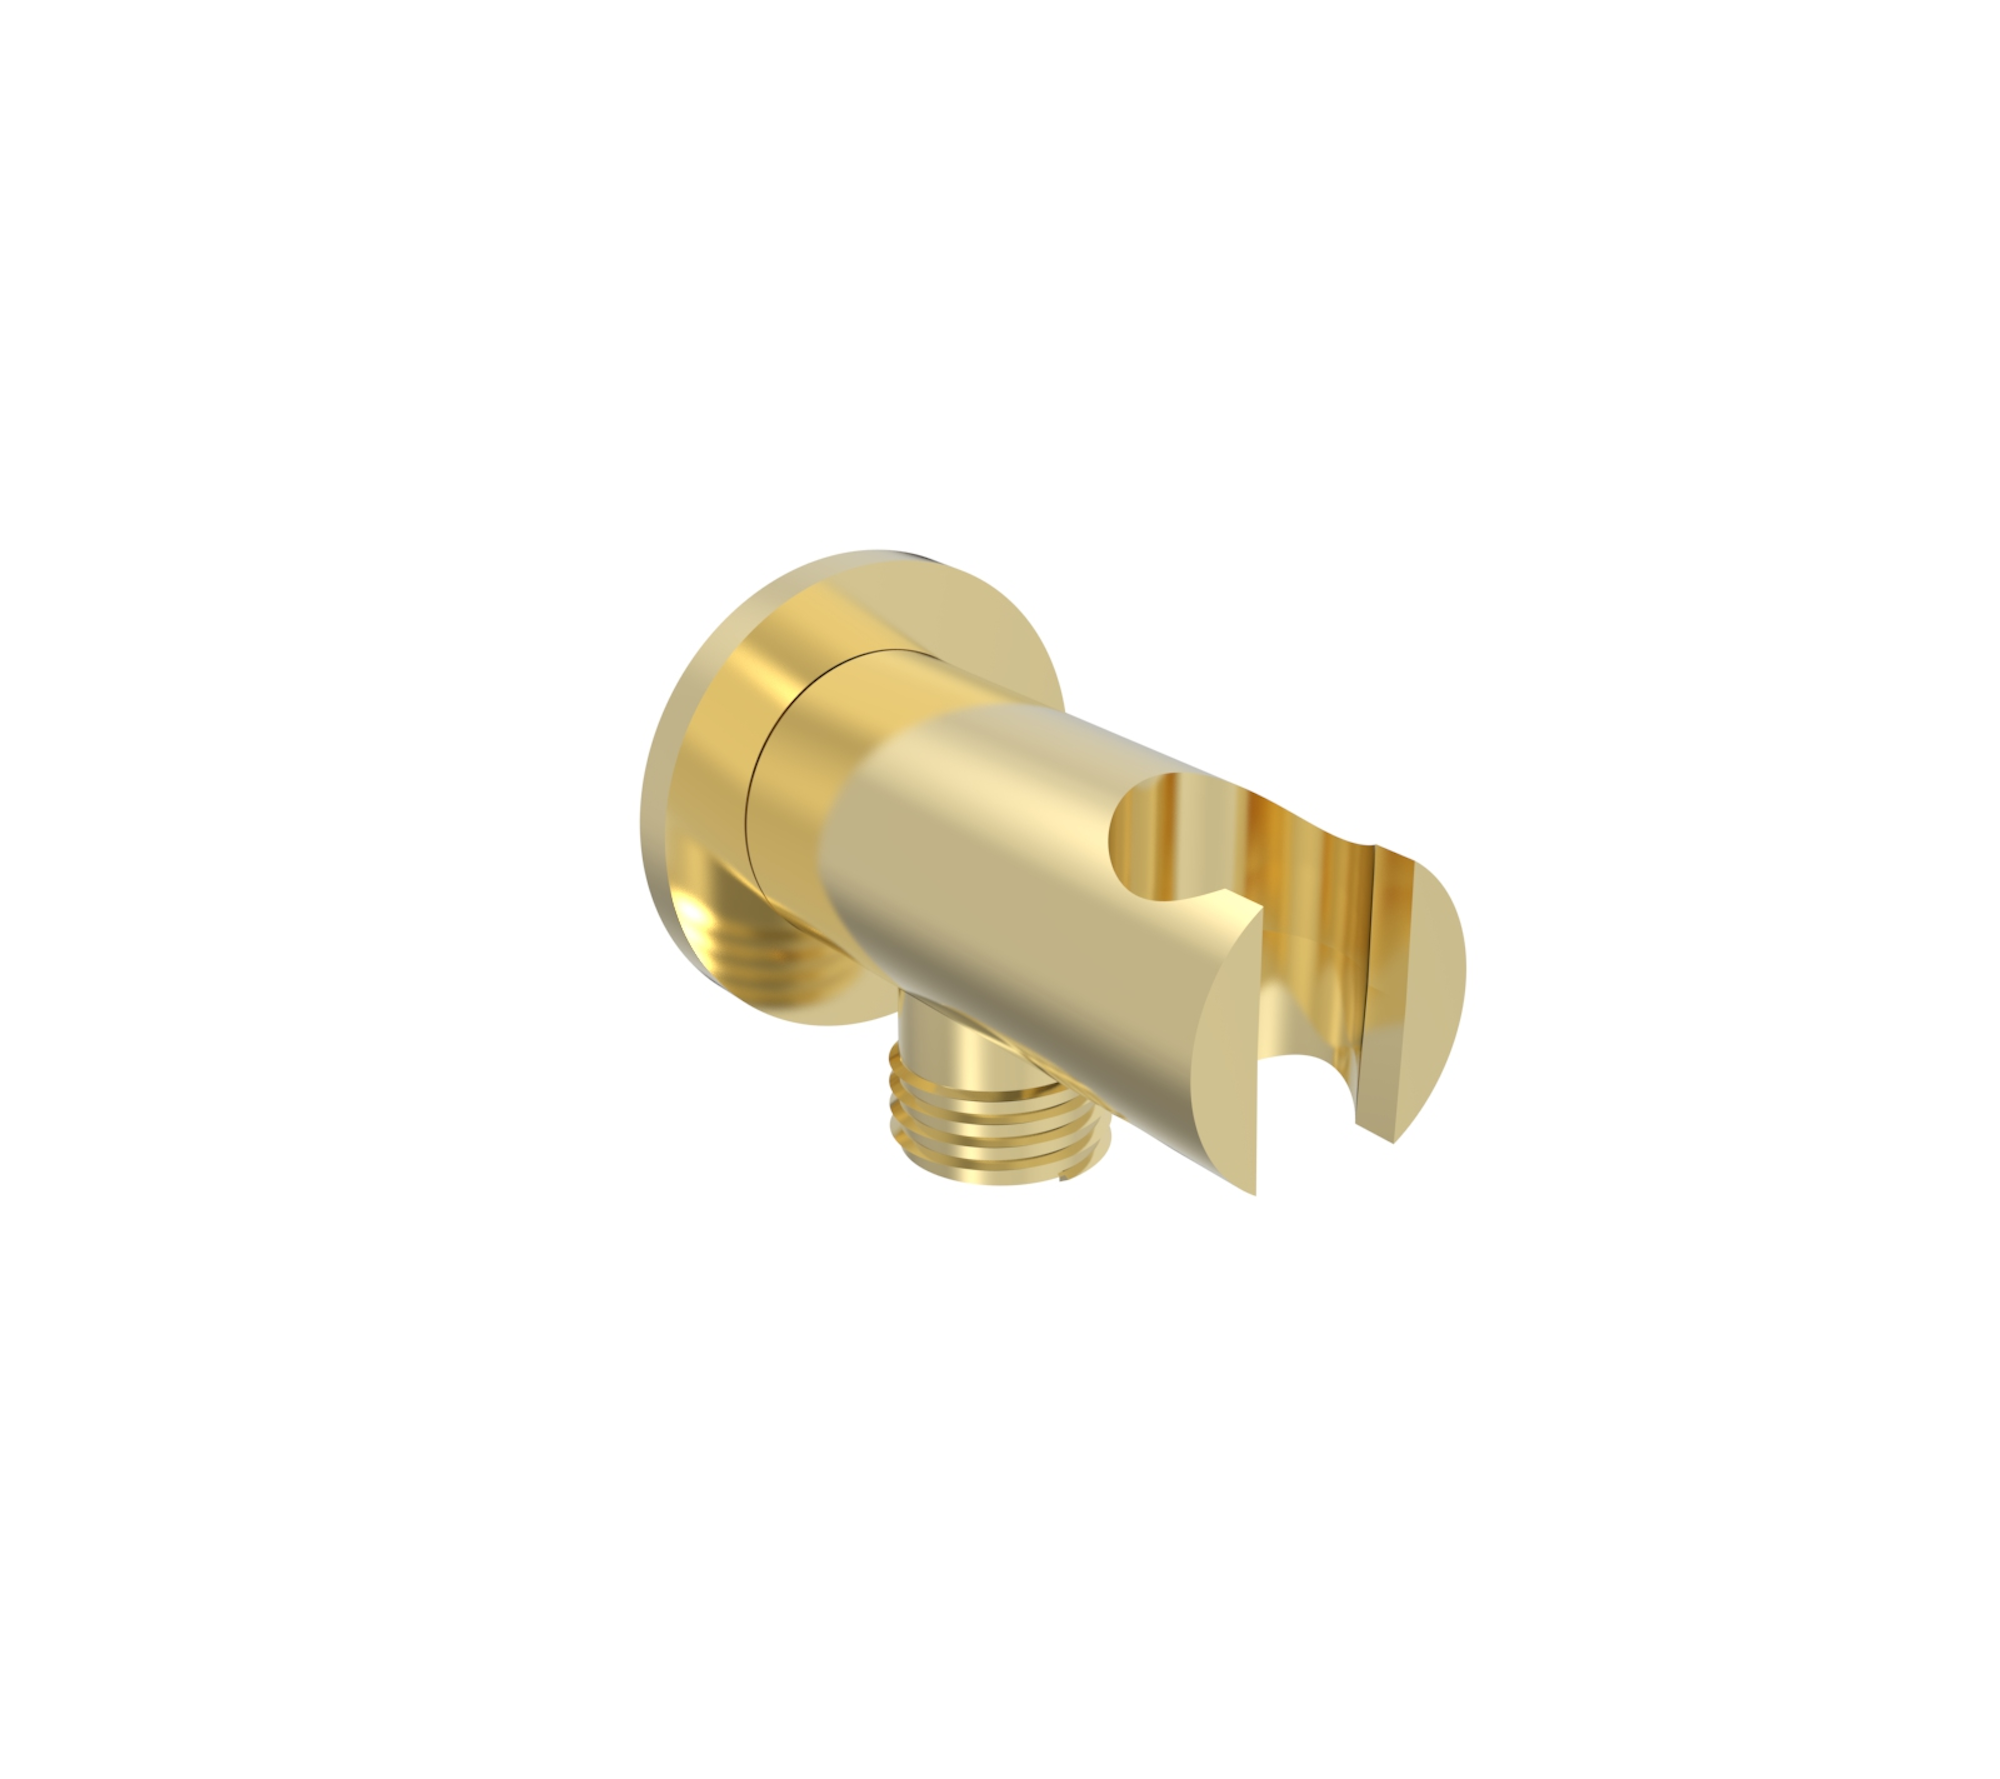 COS round shower outlet elbow & holder - Brushed Brass